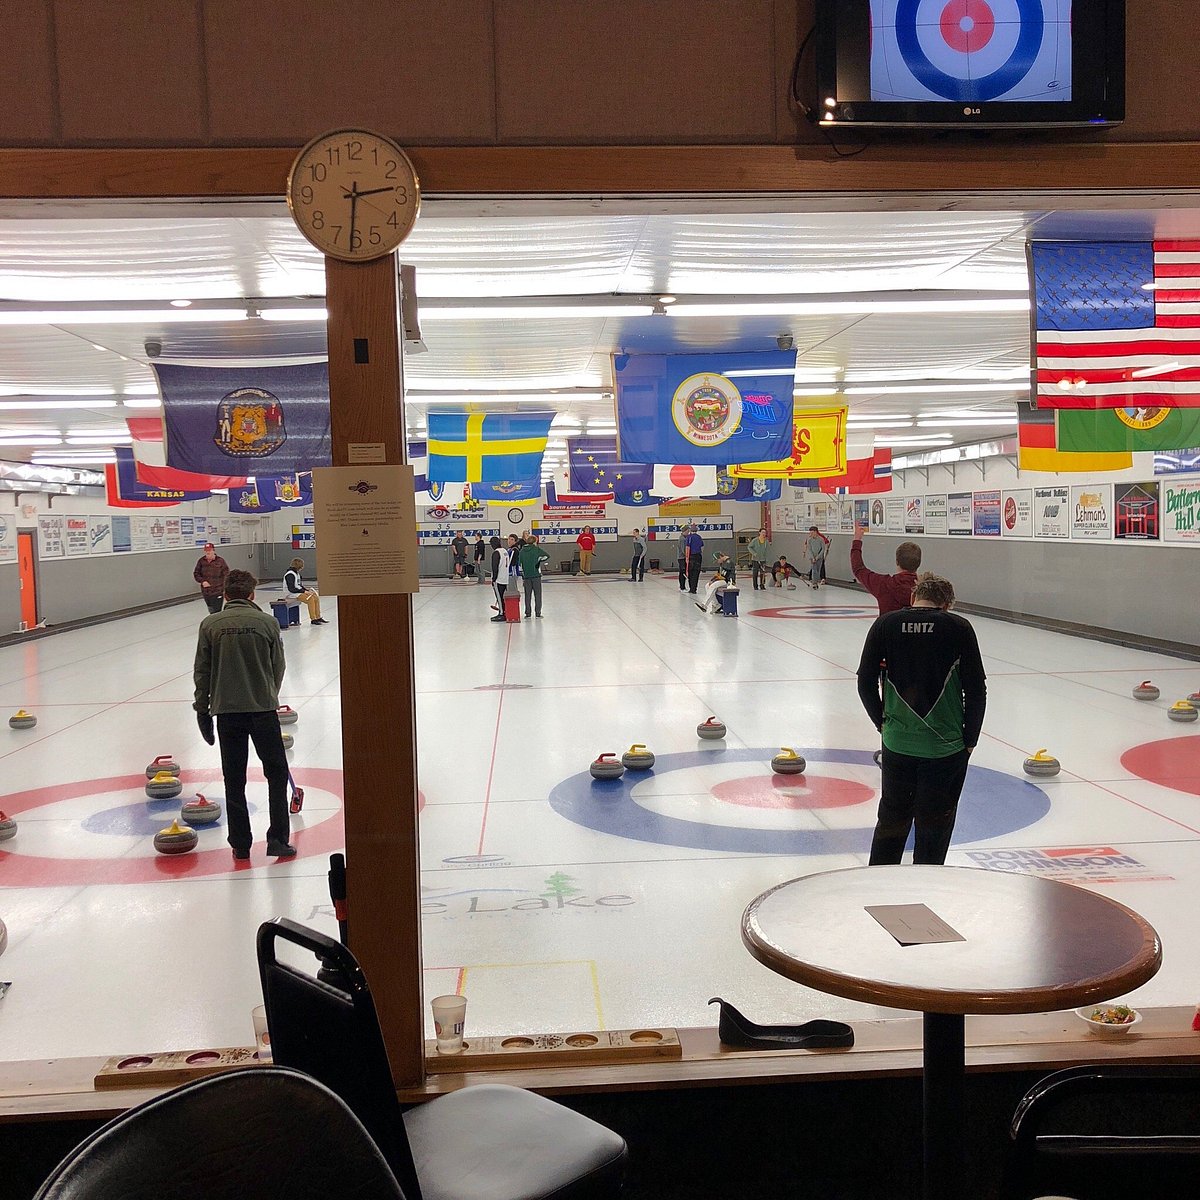 Rice Lake Curling Club - All You Need to Know BEFORE You Go